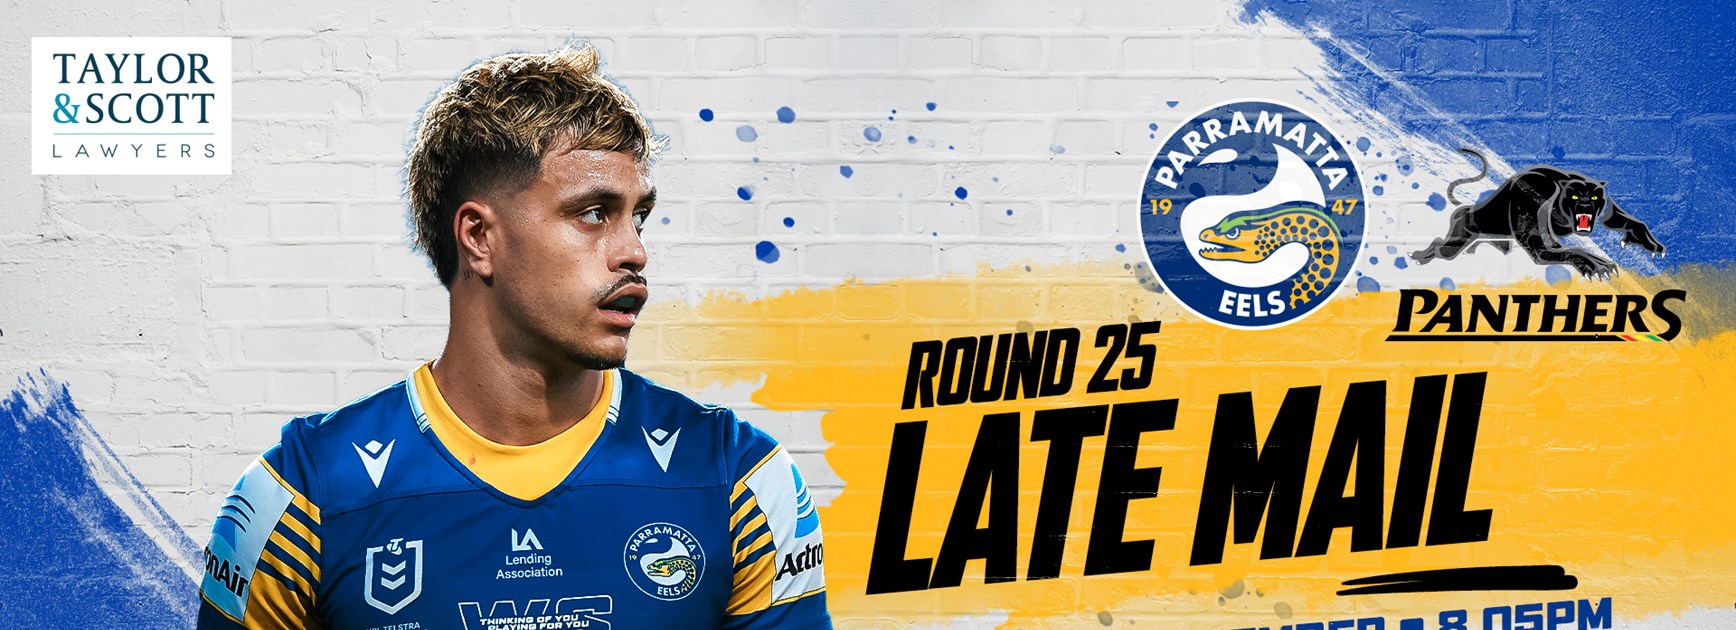 Late Mail - Eels v Panthers, Round 25